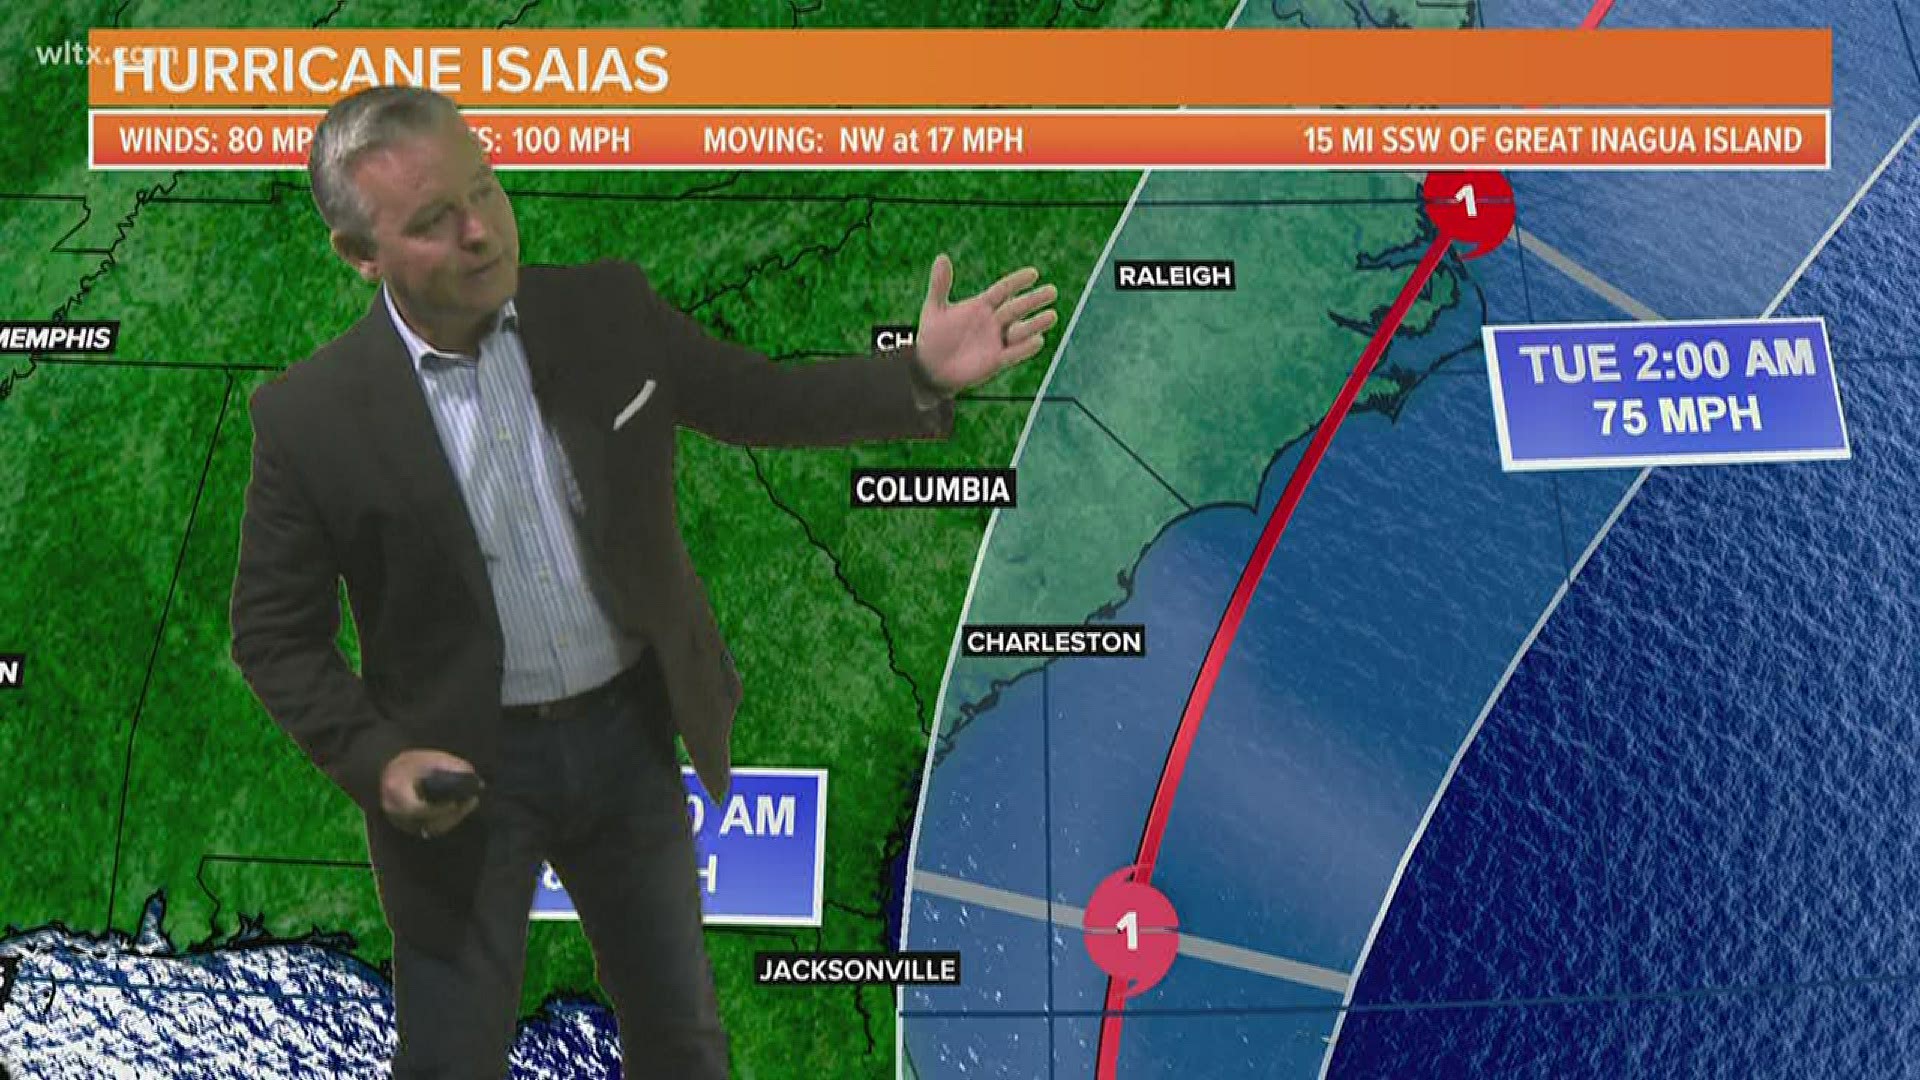 Hurricane Isaias has formed and could threaten the U.S. East Coast.